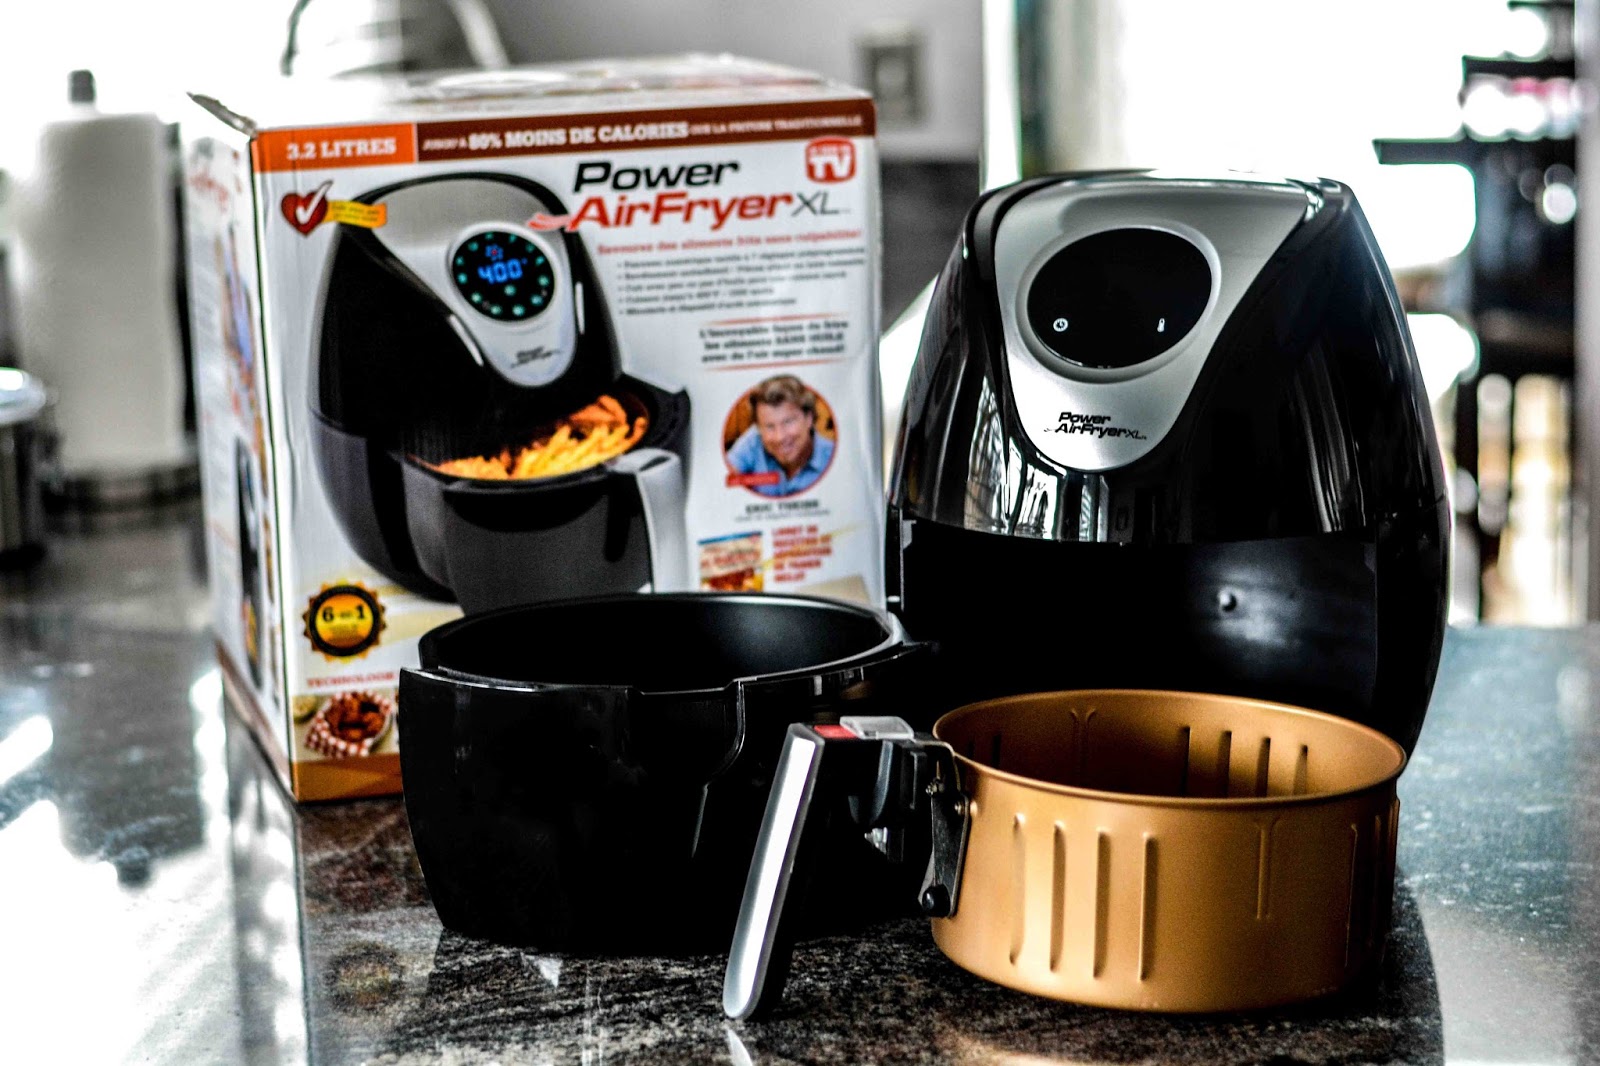 Theresa's Mixed Nuts: Power Air Fryer XL™ Lets You Eat Without Guilt